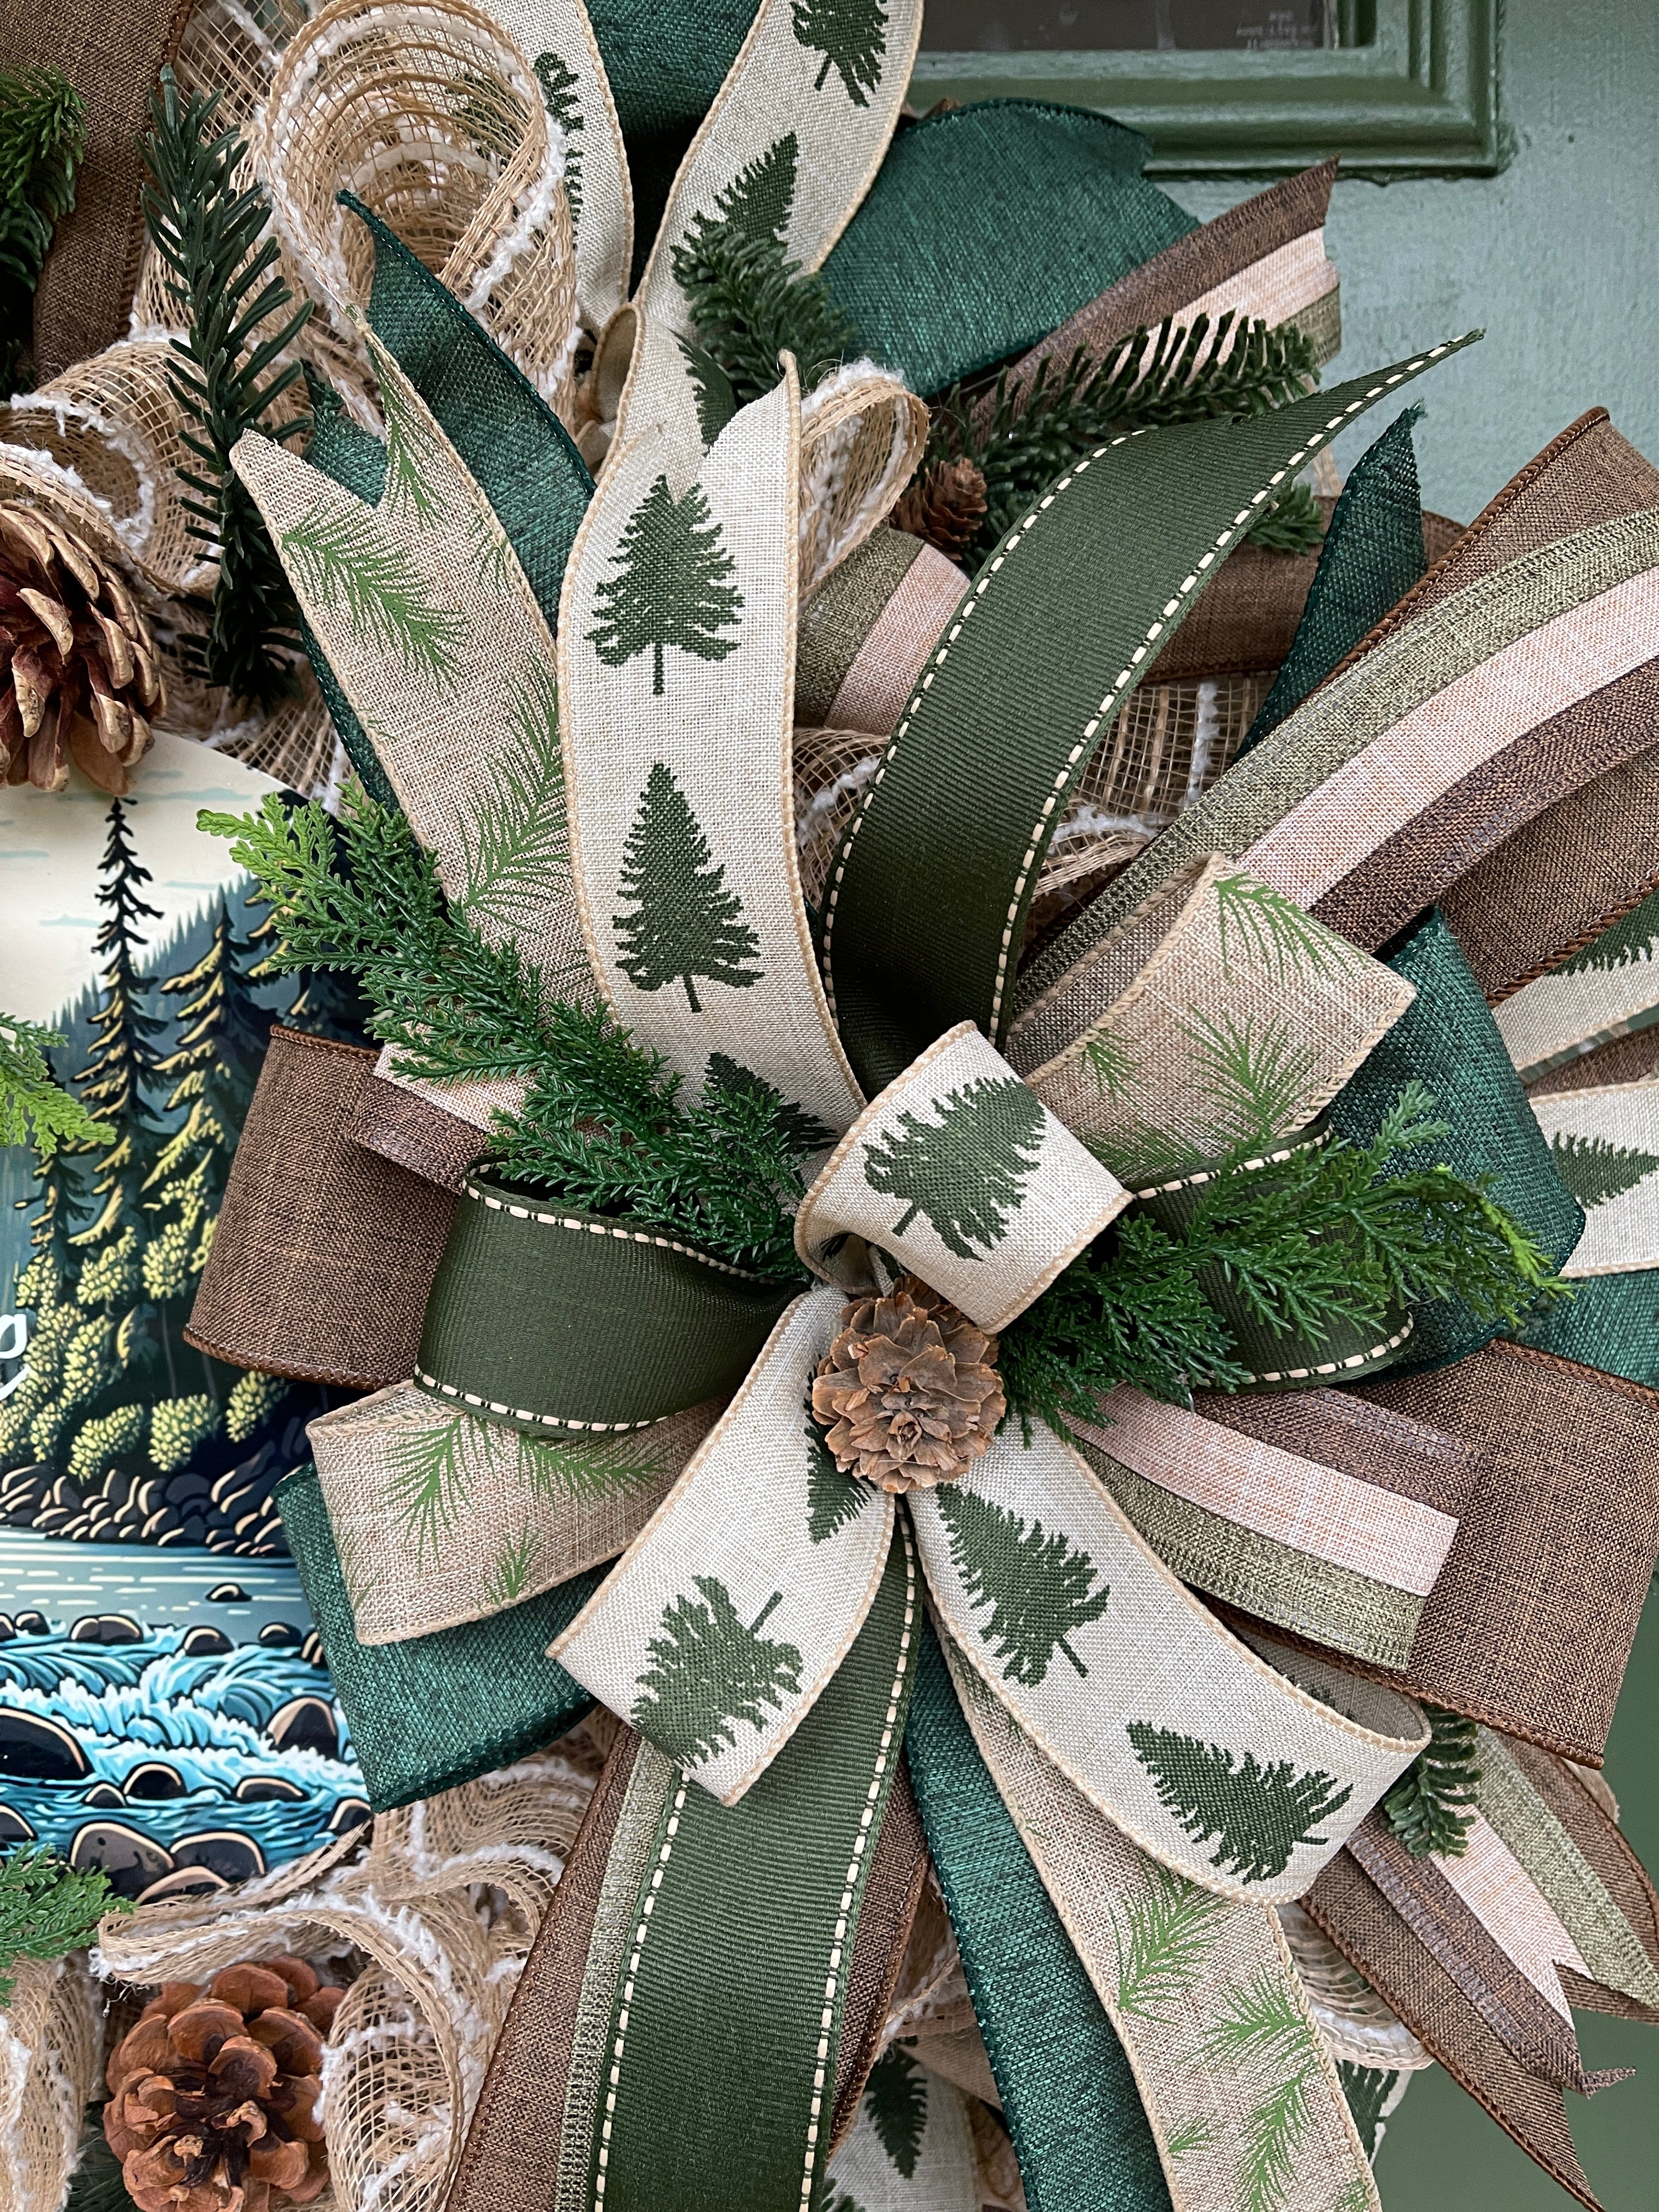 Close Up Detail of Bow with Pinecones, Pine Sprigs, and Ribbons with Pine Trees, and Pine Branches, along with Brown, Tan and Green